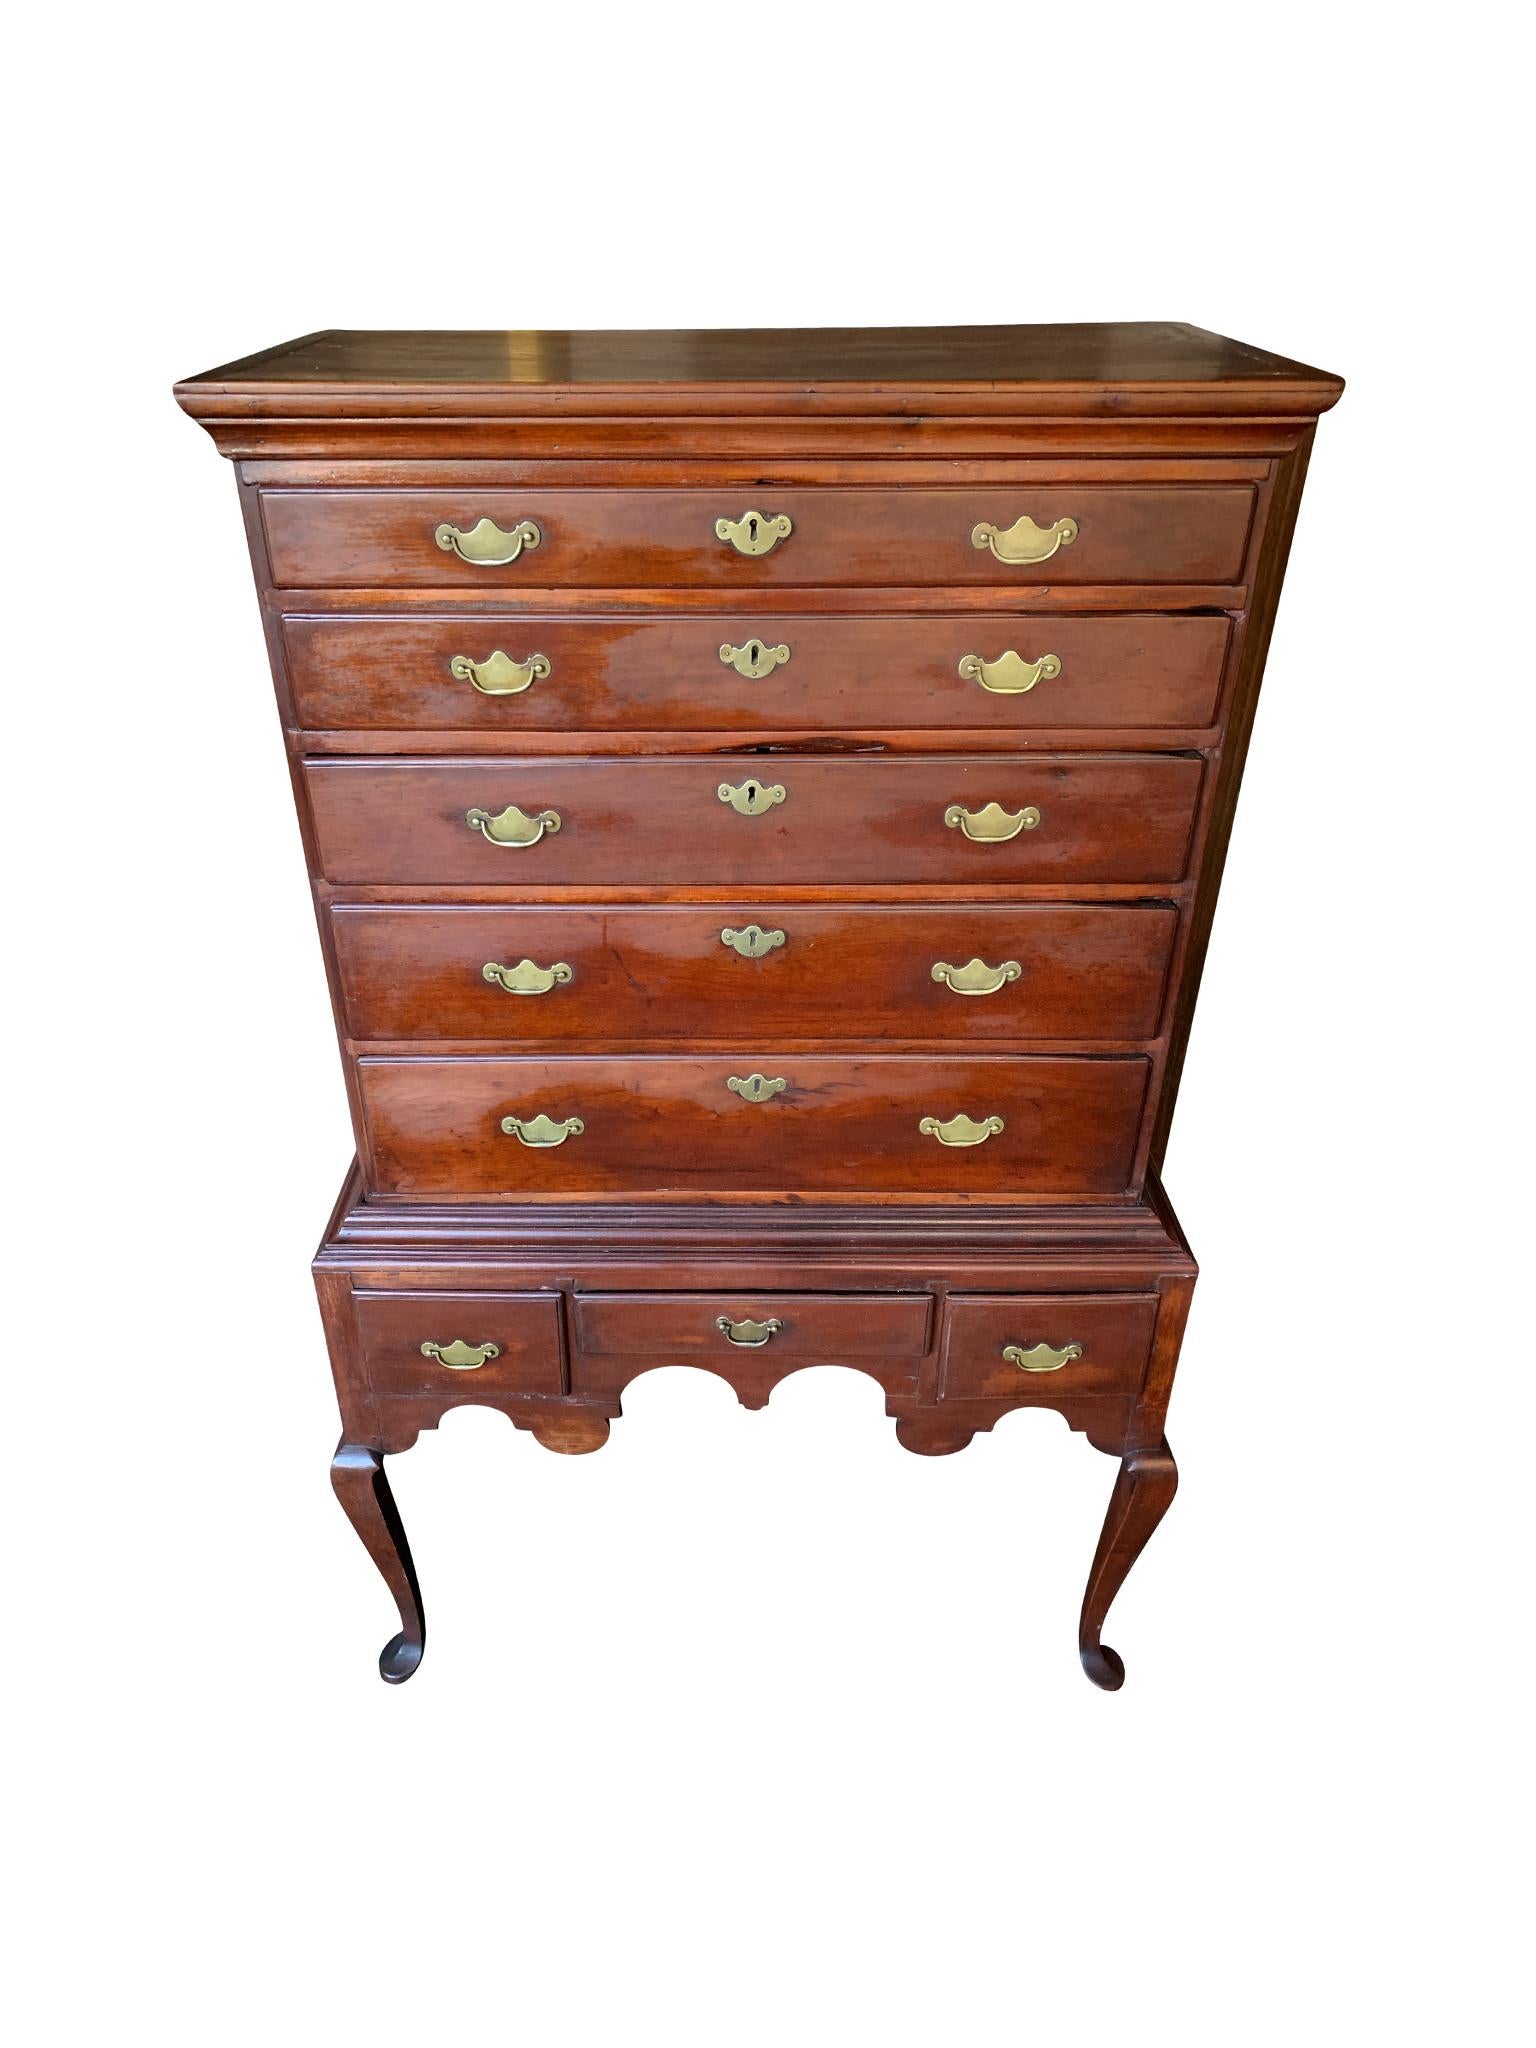 Hand-crafted Queen Anne highboy, circa 1720s. New England. The chest consists of 2 sections made from a lovely combination of cherry and walnut wood. The upper half has 5 full length drawers, while the lower half has 3 small drawers. Each is